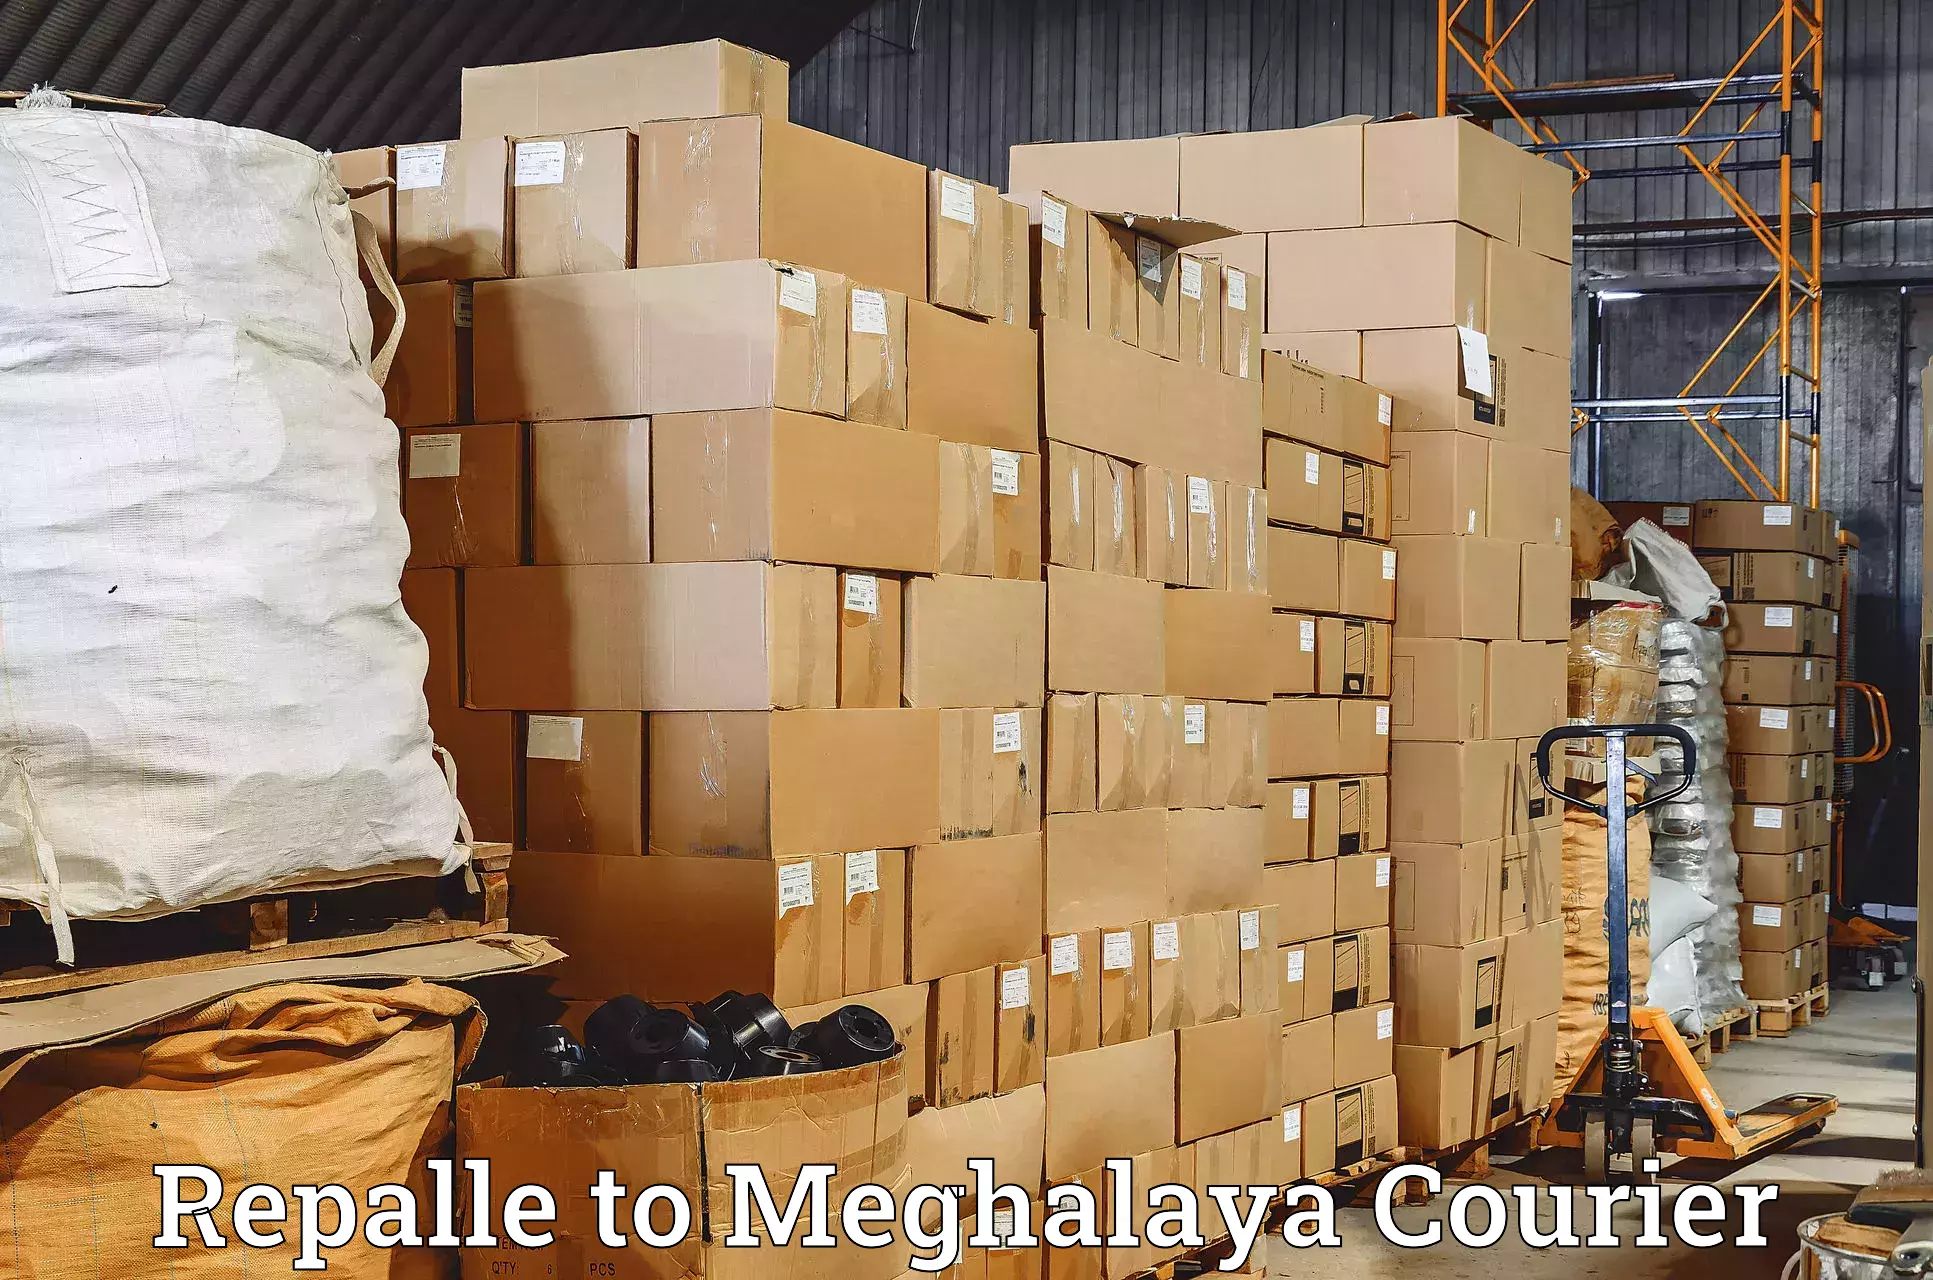 Seamless shipping experience in Repalle to Phulbari